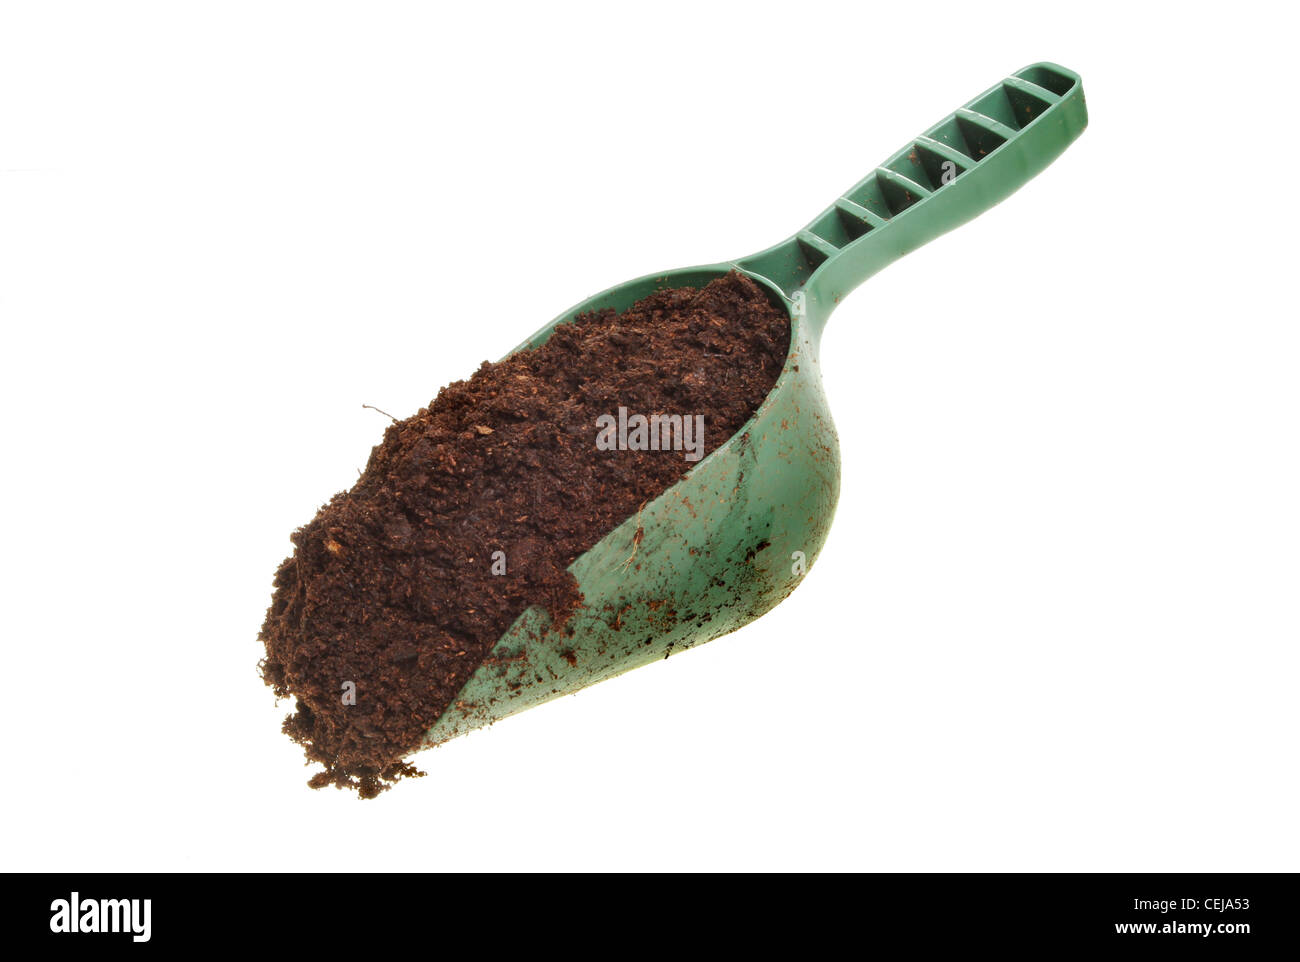 Garden compost in a plastic scoop isolated against white Stock Photo